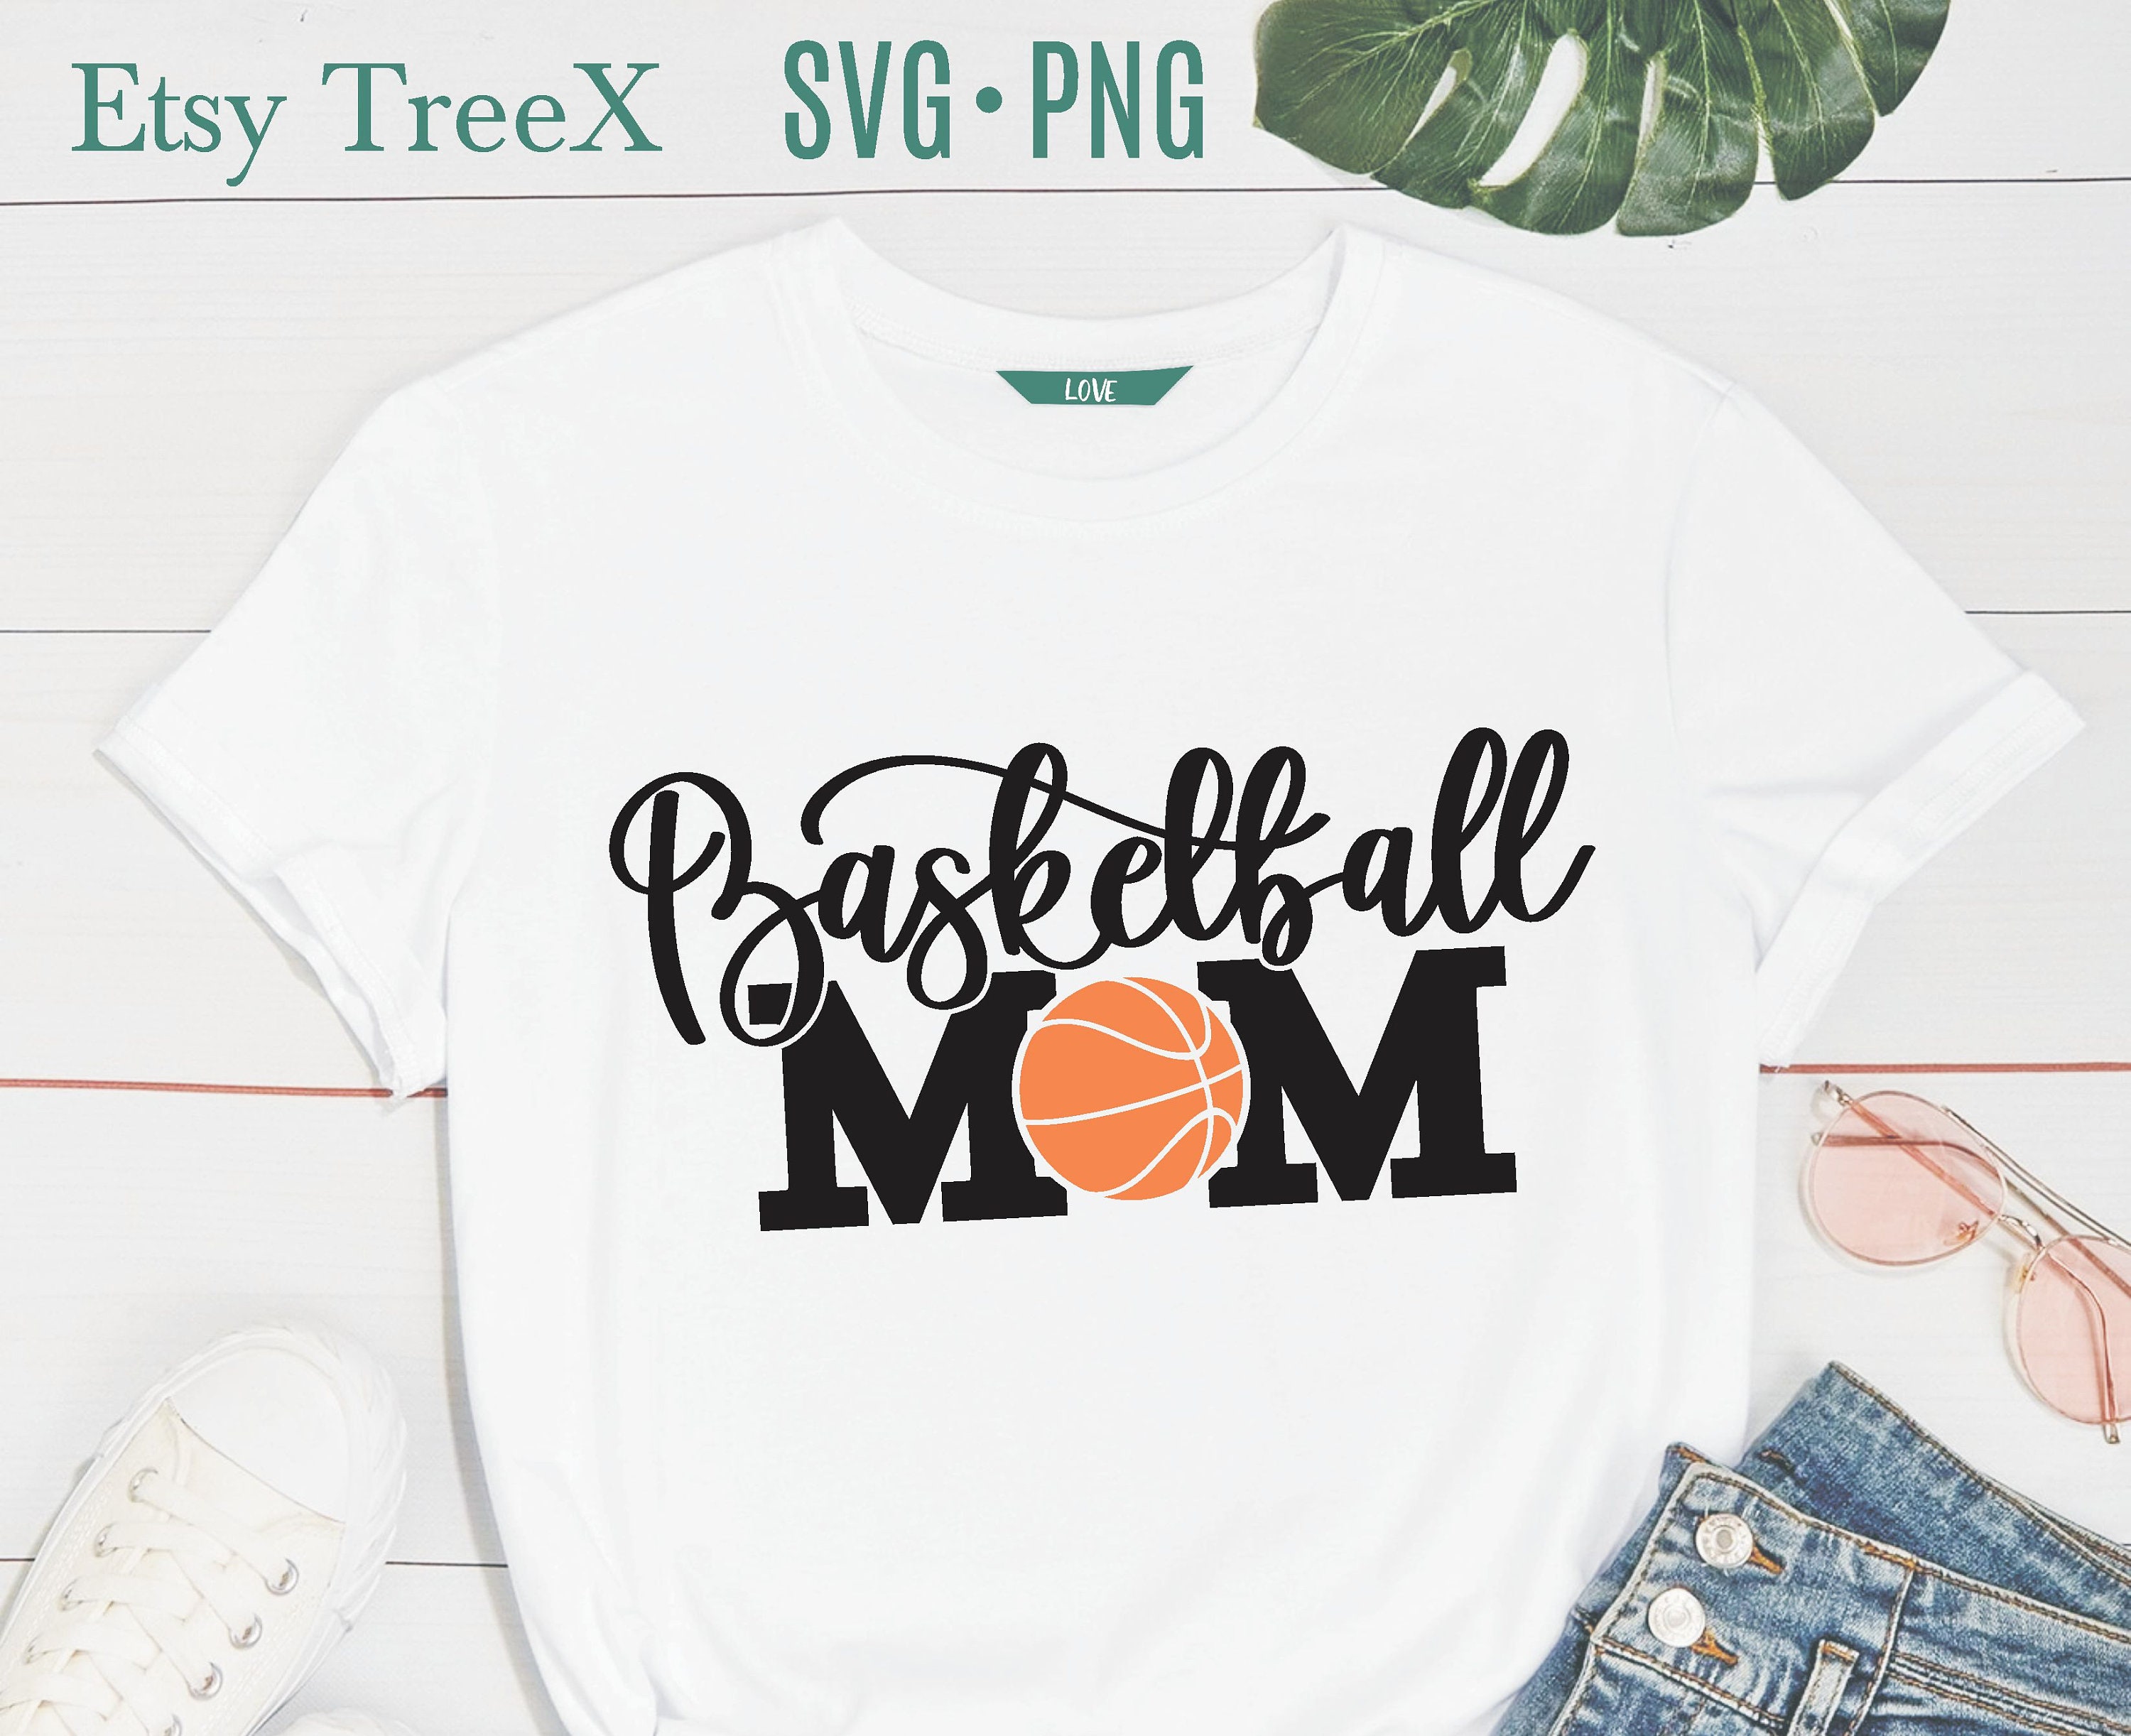 Hand Lettered Basketball SVG Bundle by Oxee Basketball Ball - Etsy